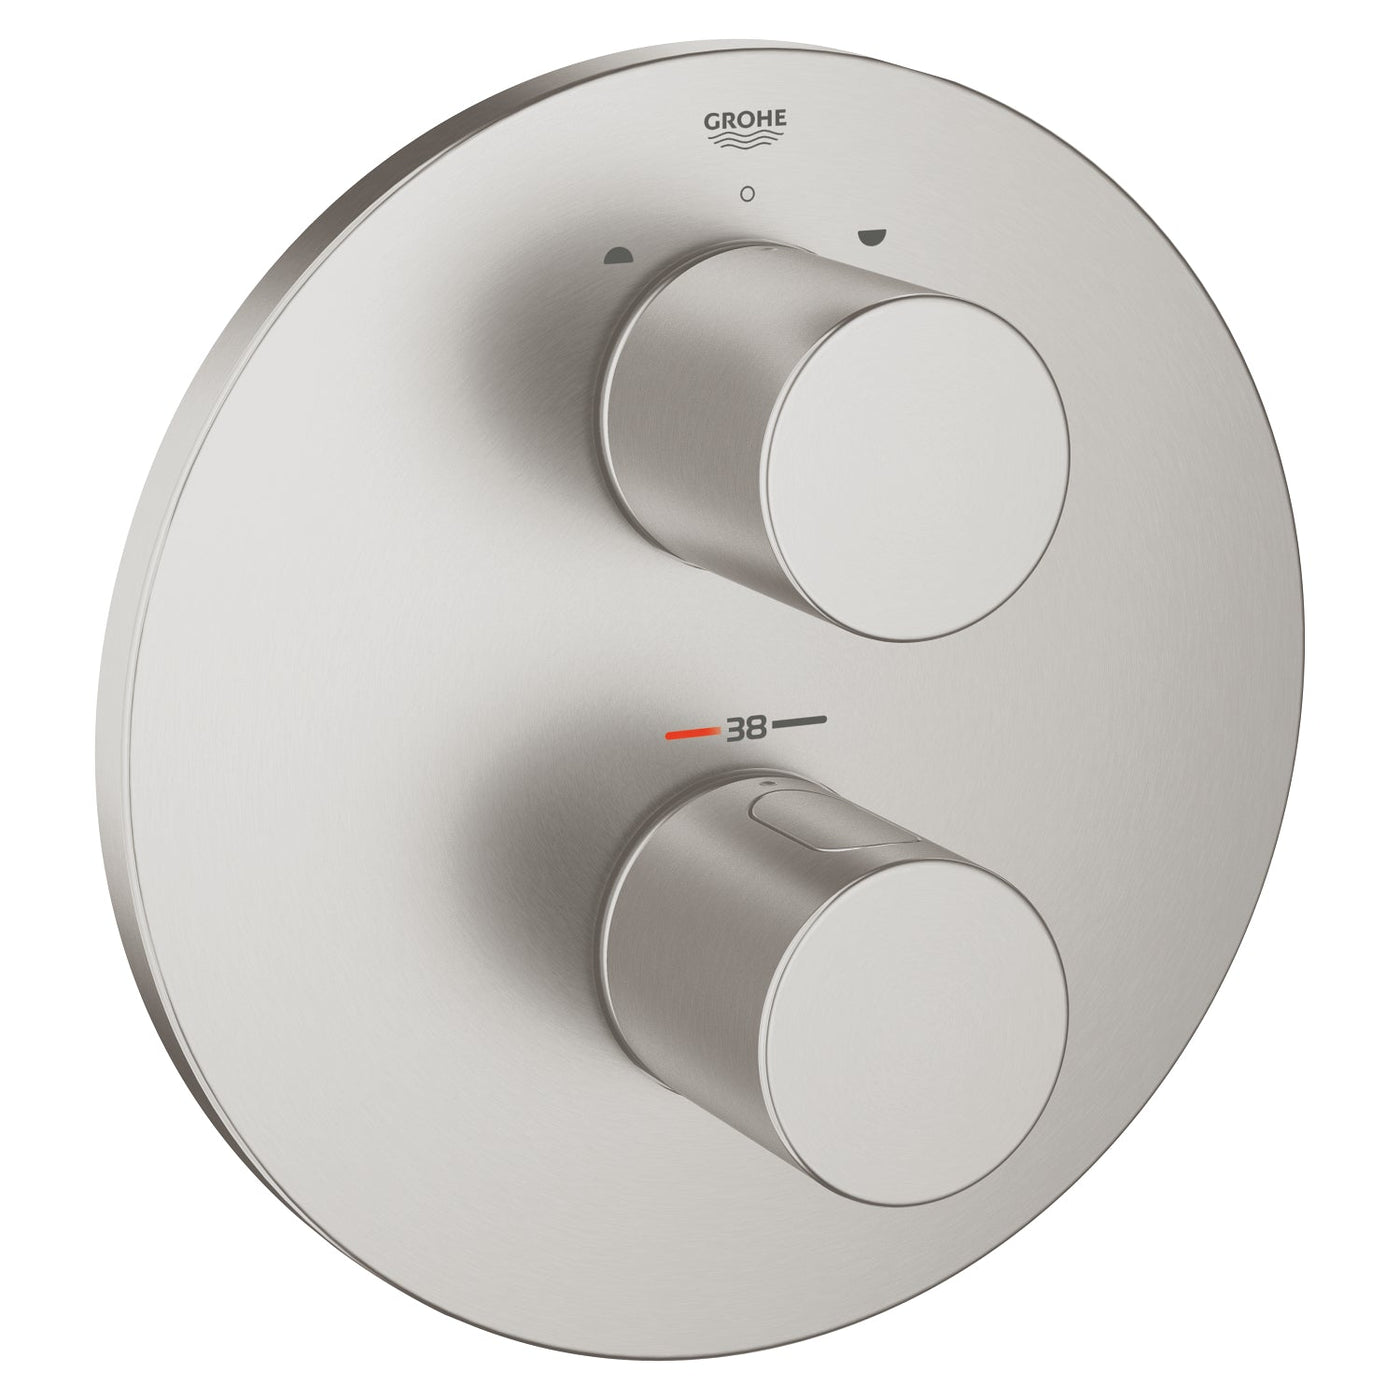 Grohe Supersteel Grohtherm 3000 Cosmopolitan Thermostat with integrated 2-way diverter
for bath or shower with more than one outlet - Letta London - Twin Valves With Diverter